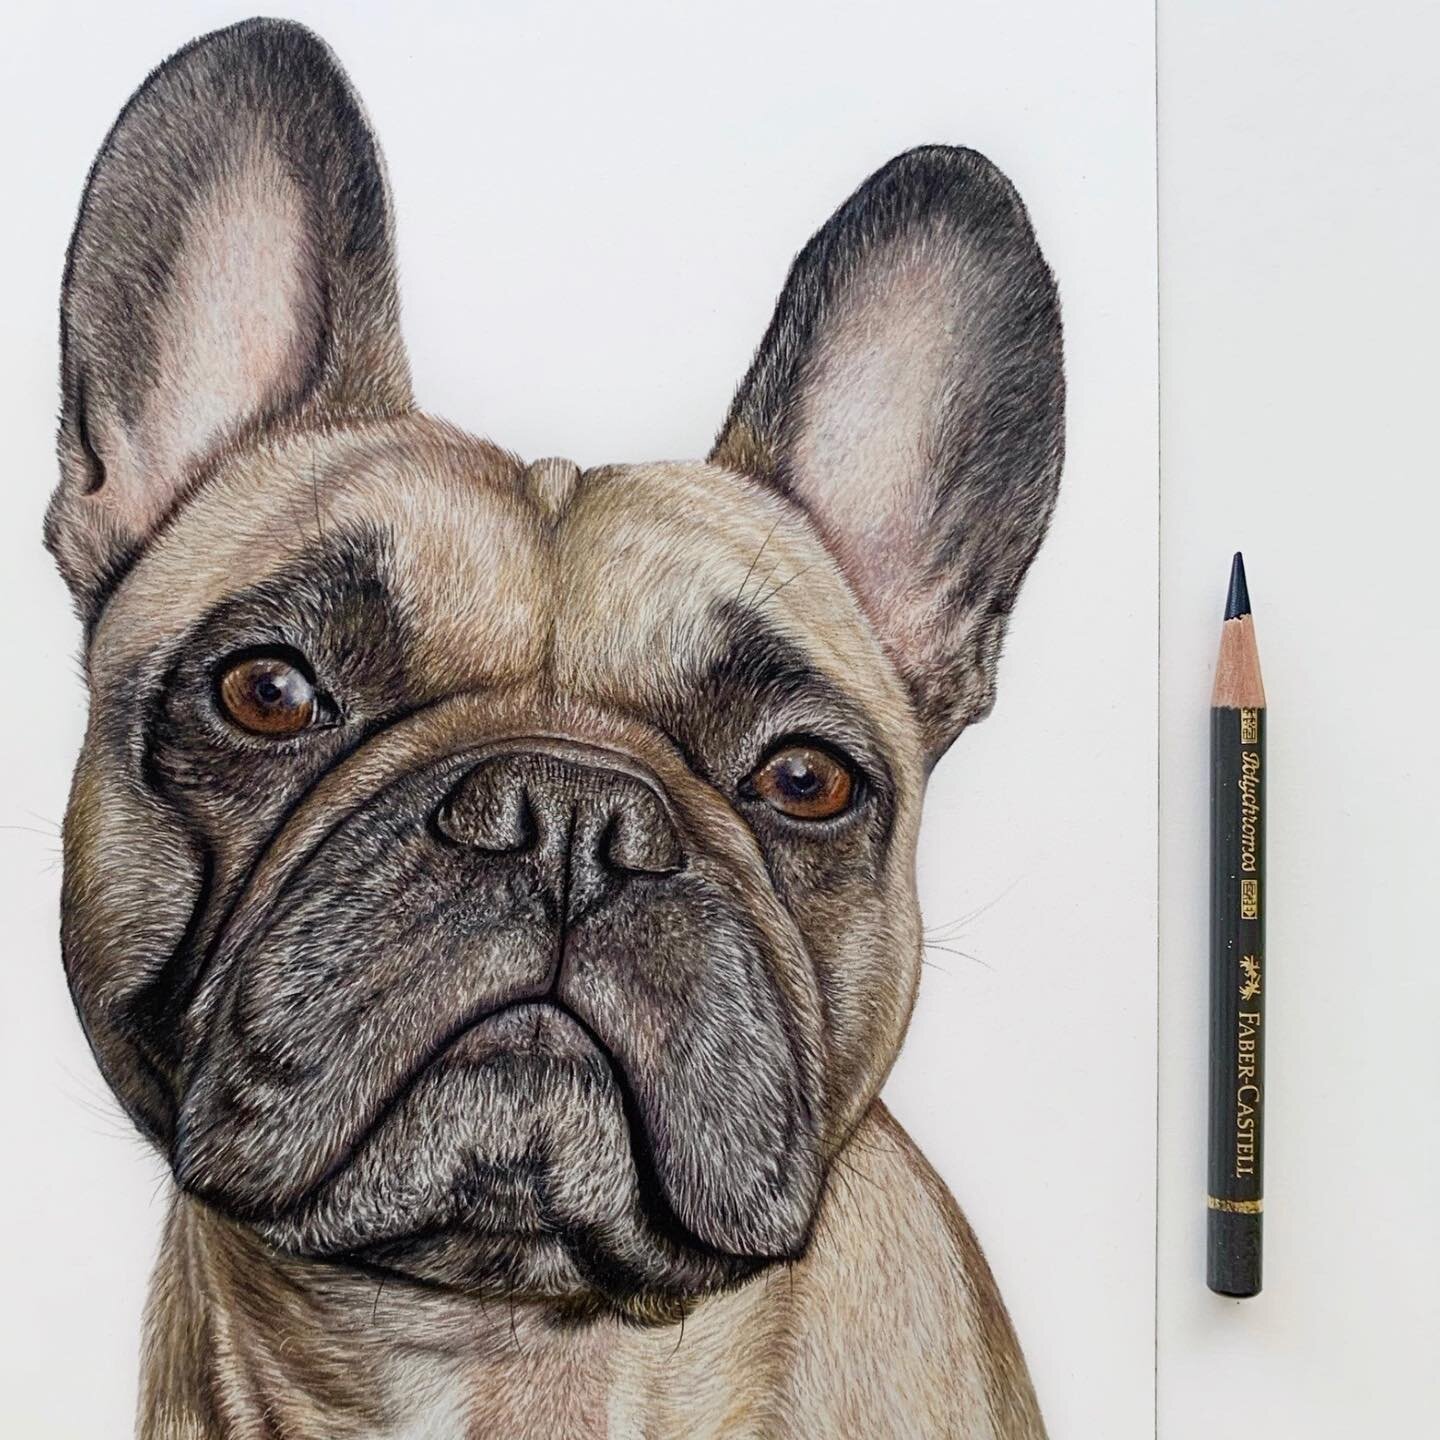 Here&rsquo;s Tuco all complete ✍🏻✨ I loved drawing this handsome fella, really hope you like him 💛
 
✐ ✎ ✐ ✎ ✐ ✎ ✐ ✎ ✐ ✎ ✐ ✎ ✐ ✎ ✐ ✎ ✐ ✎ ✐ ✎ ✐ ✎
#frenchie #frenchbulldog #frenchbulldogdrawing #frenchiepost #frenchiepet #colouredpencilartist #artist